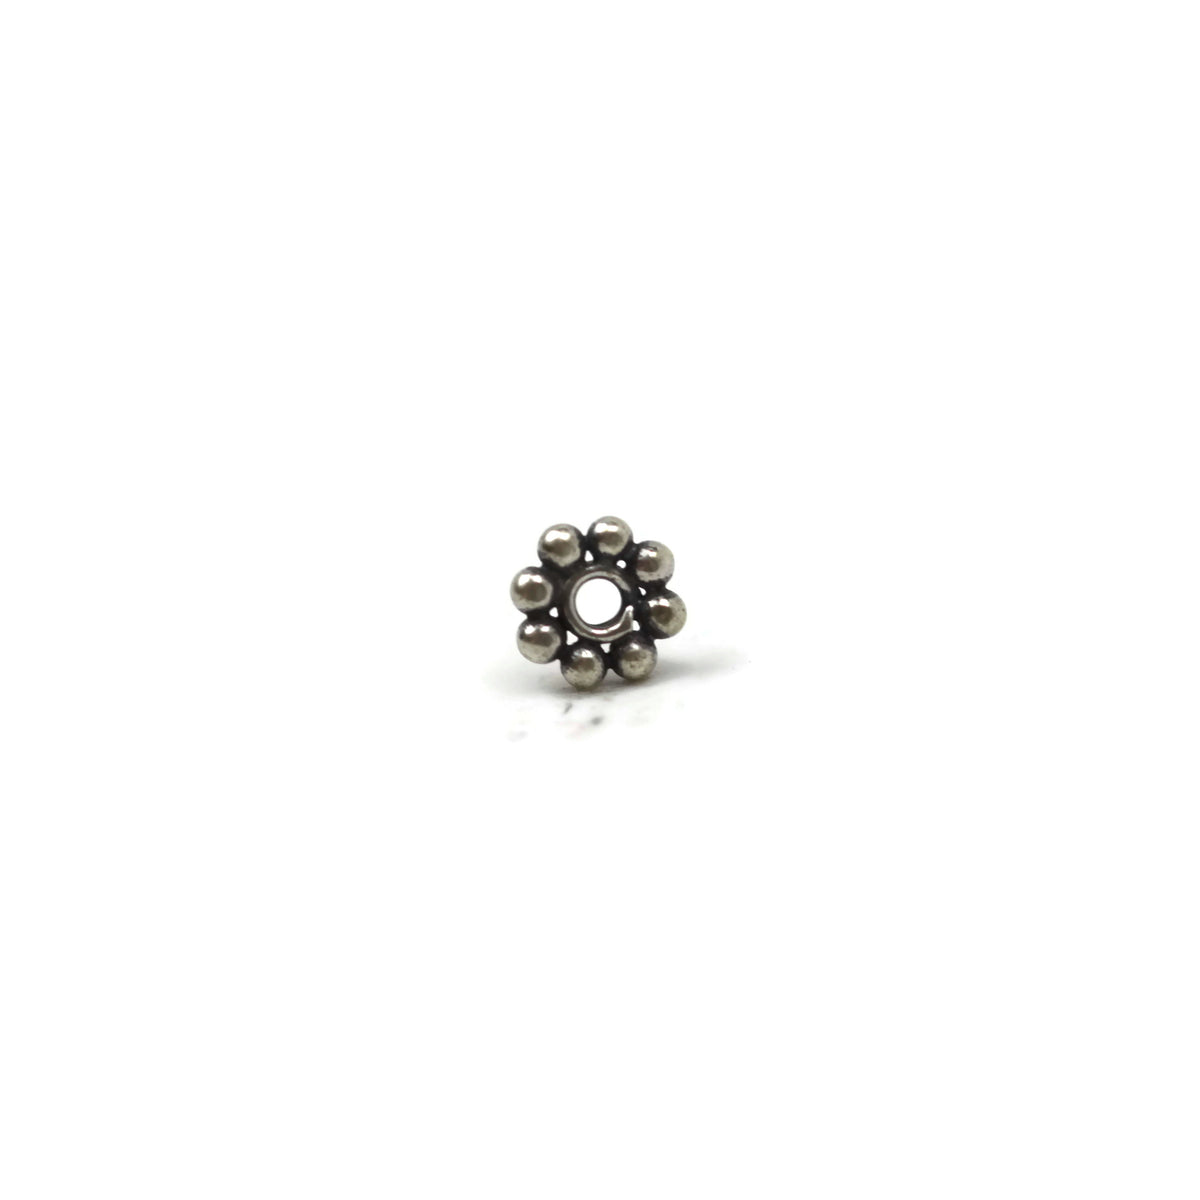 Bali Bead Sterling Silver Daisy Spacer Bead 4 mm